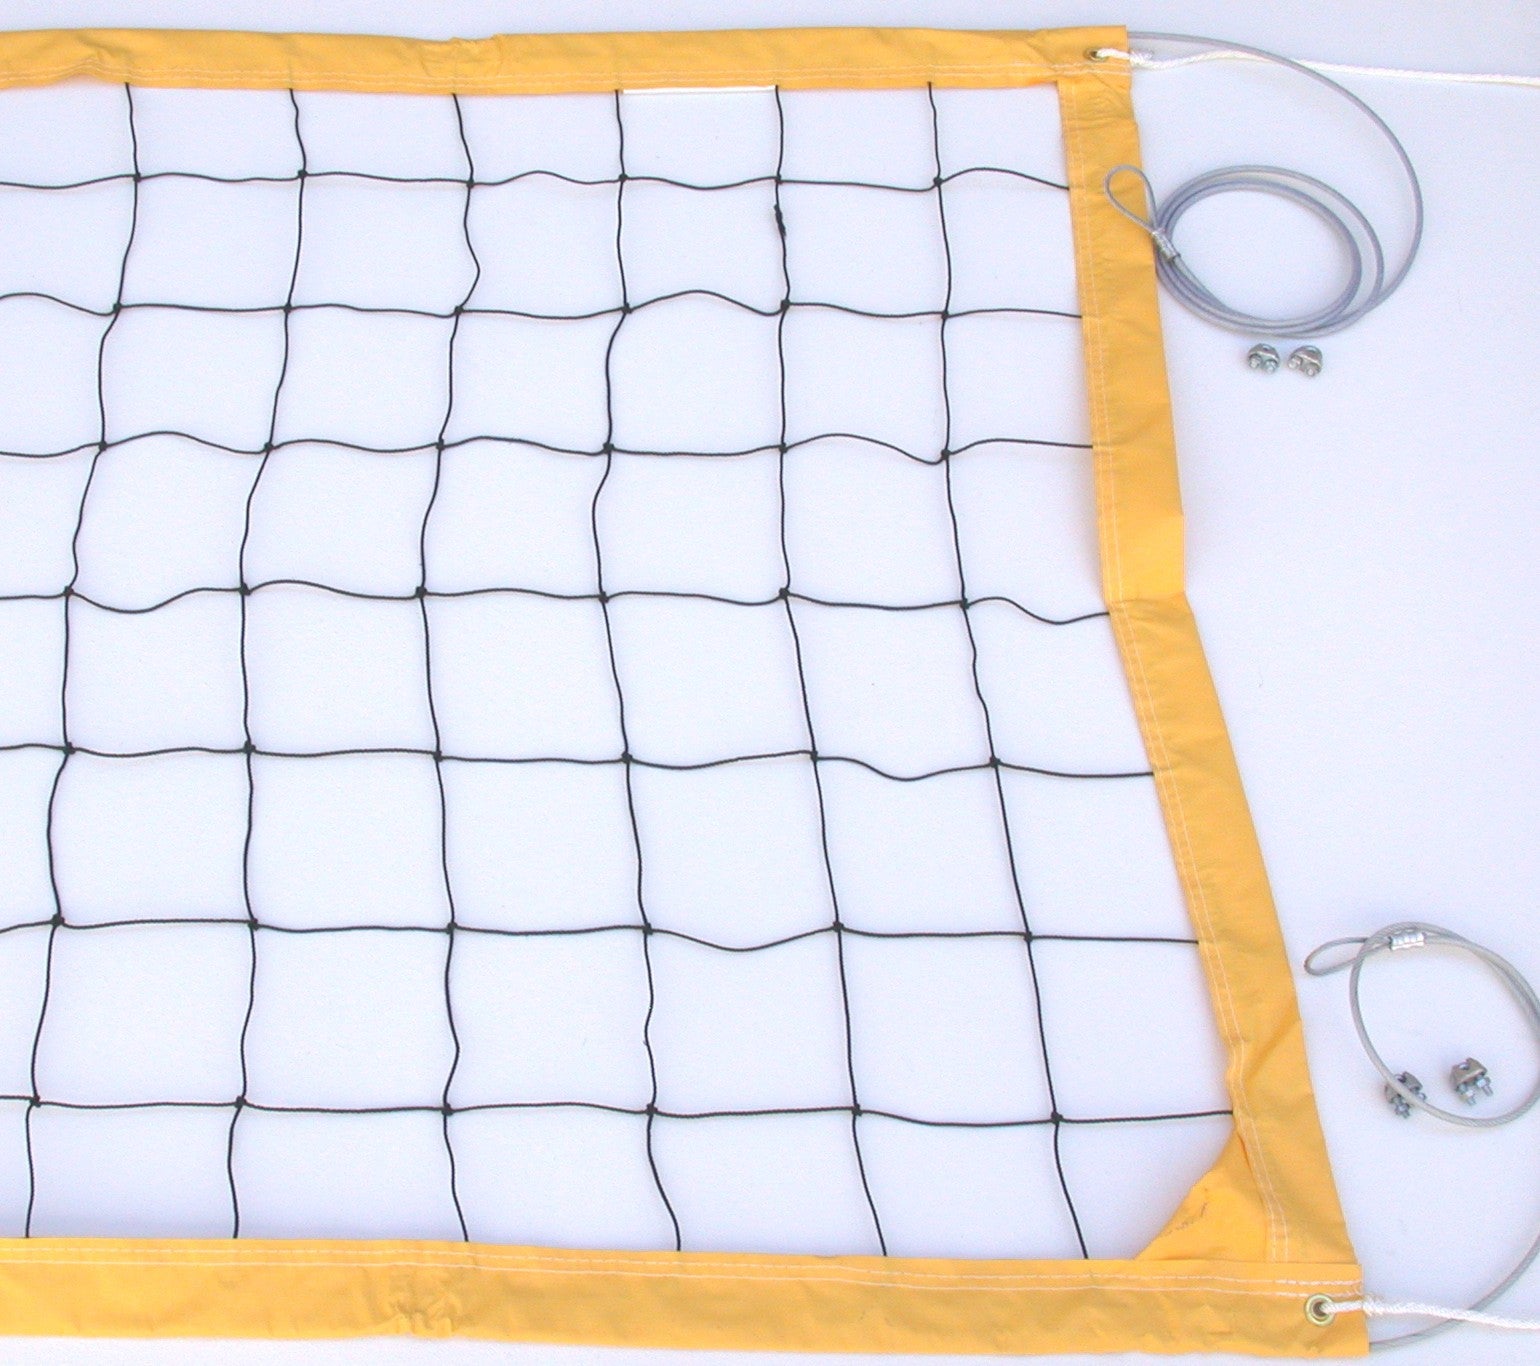 VCCY-Deluxe Volleyball Net Aircraft Cable Yellow Vinyl